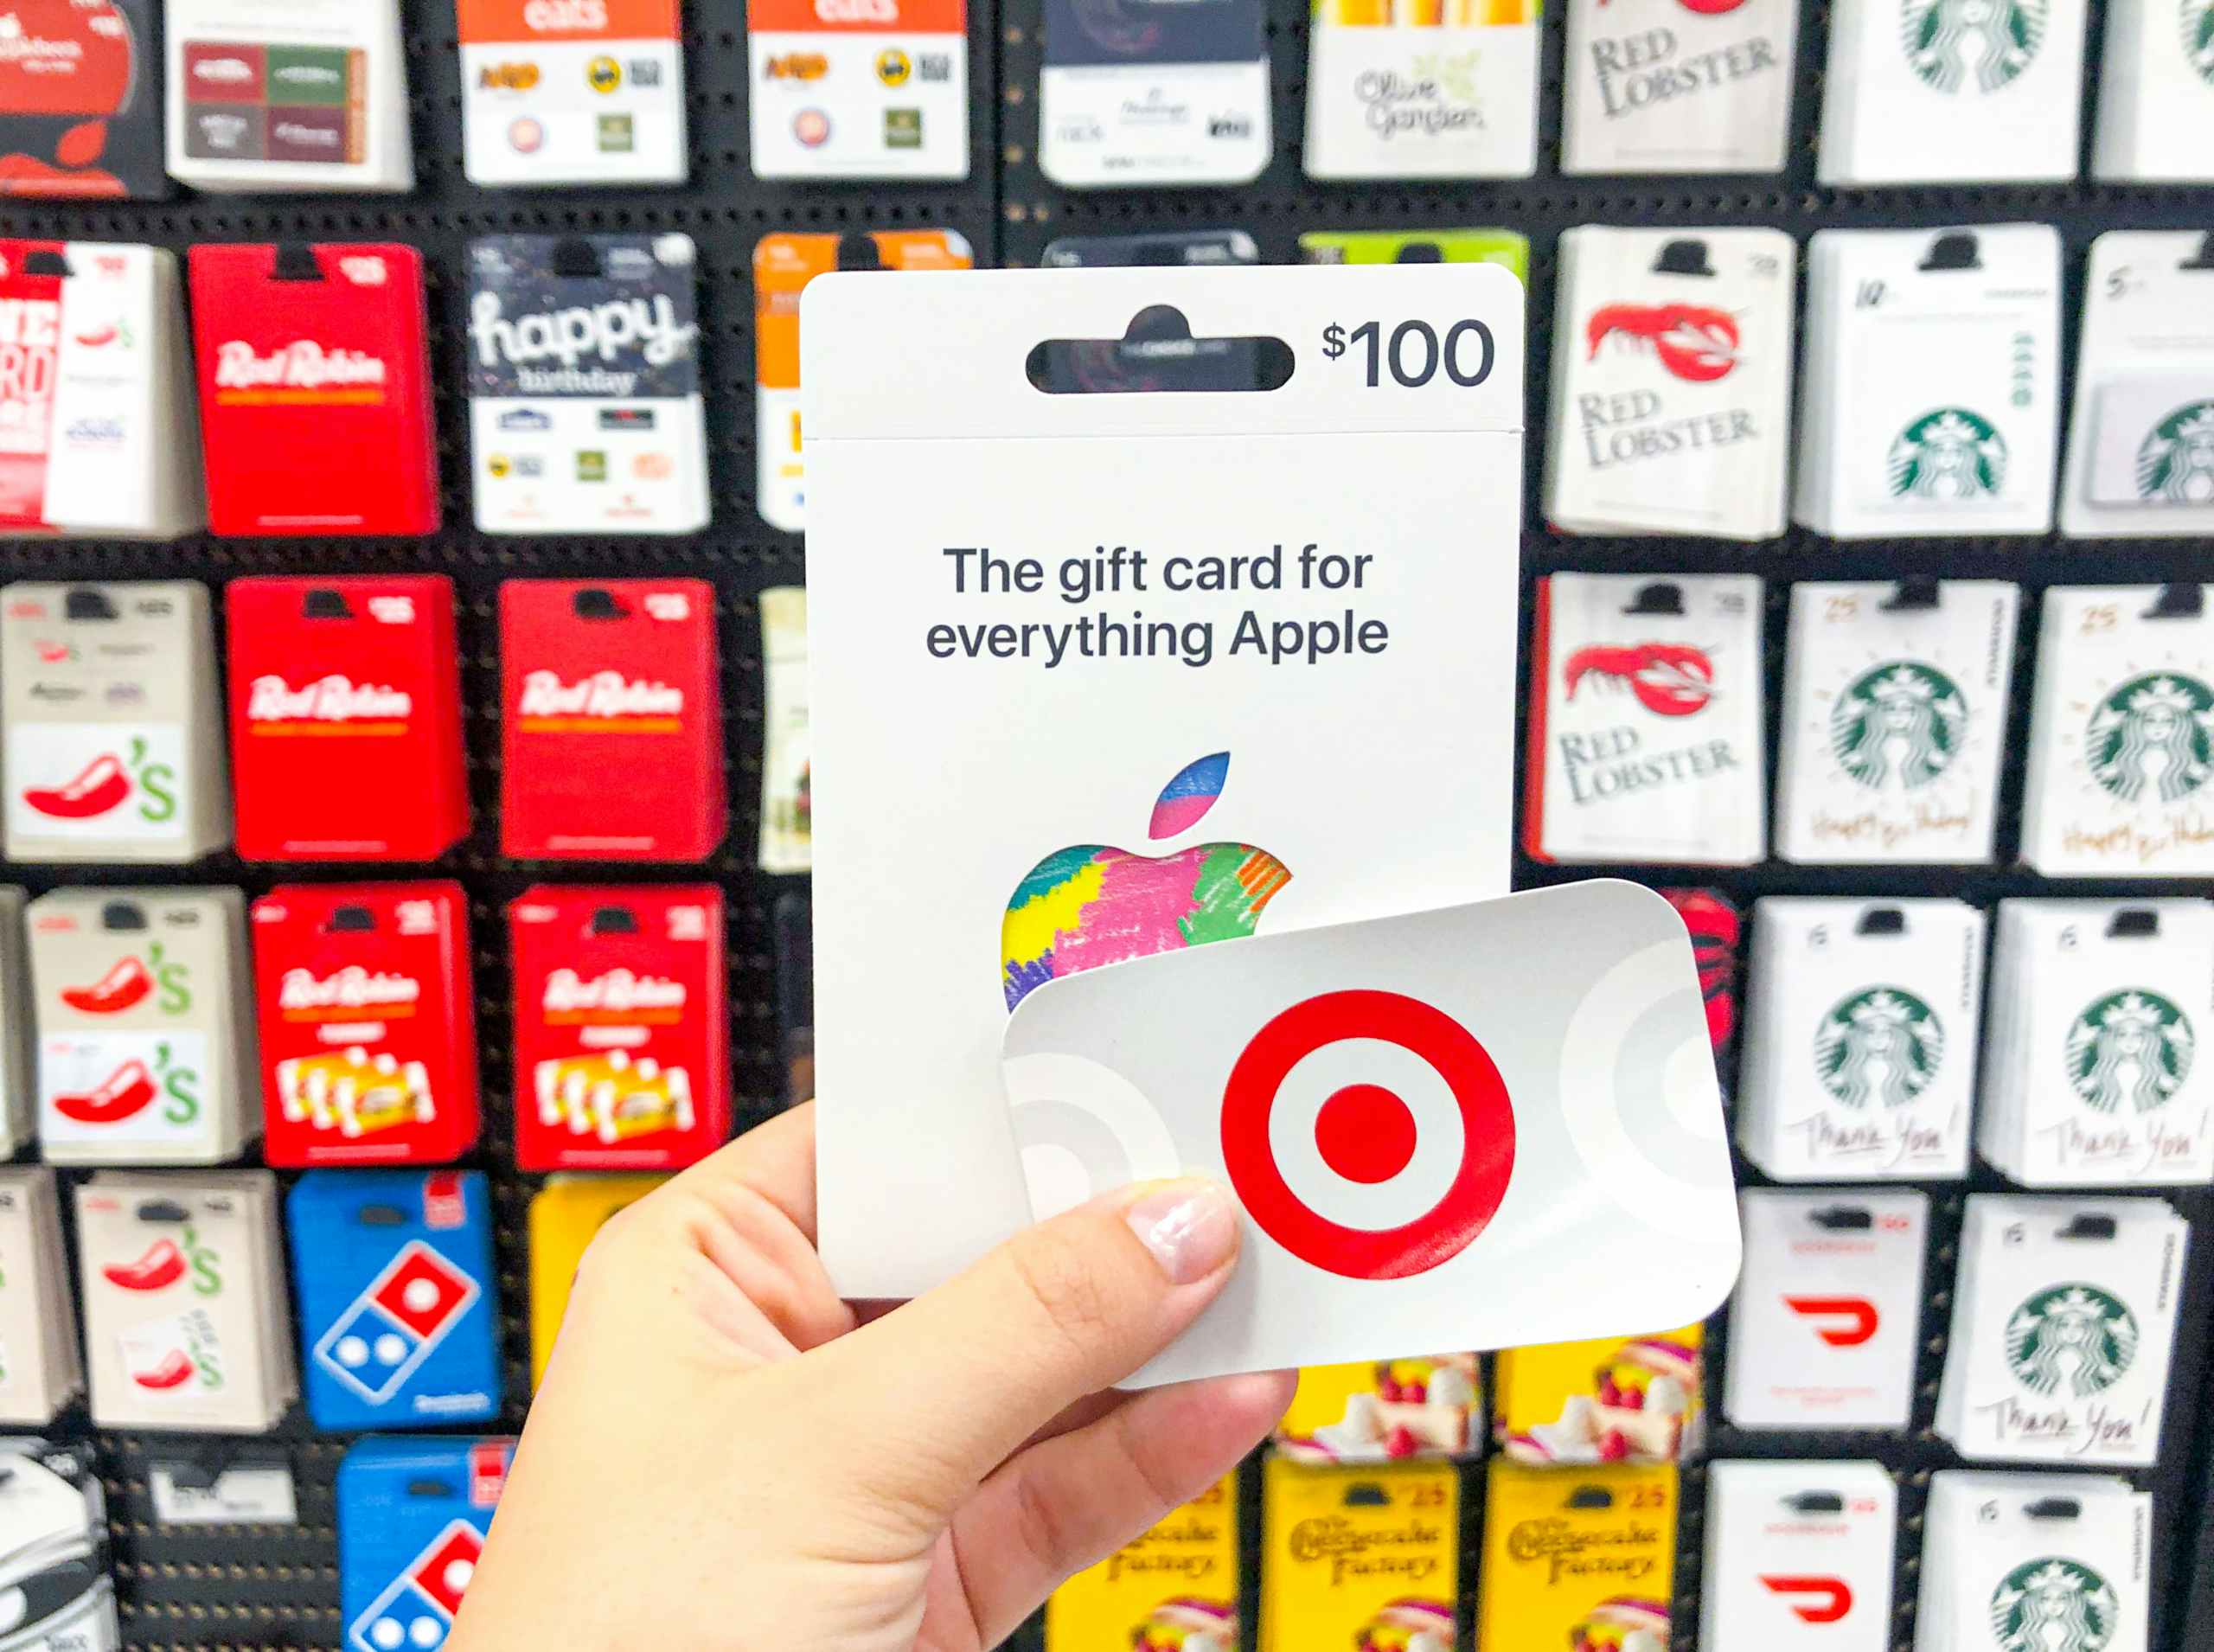 hand holding Apple gift card and Target gift card in front of gift card display at Target